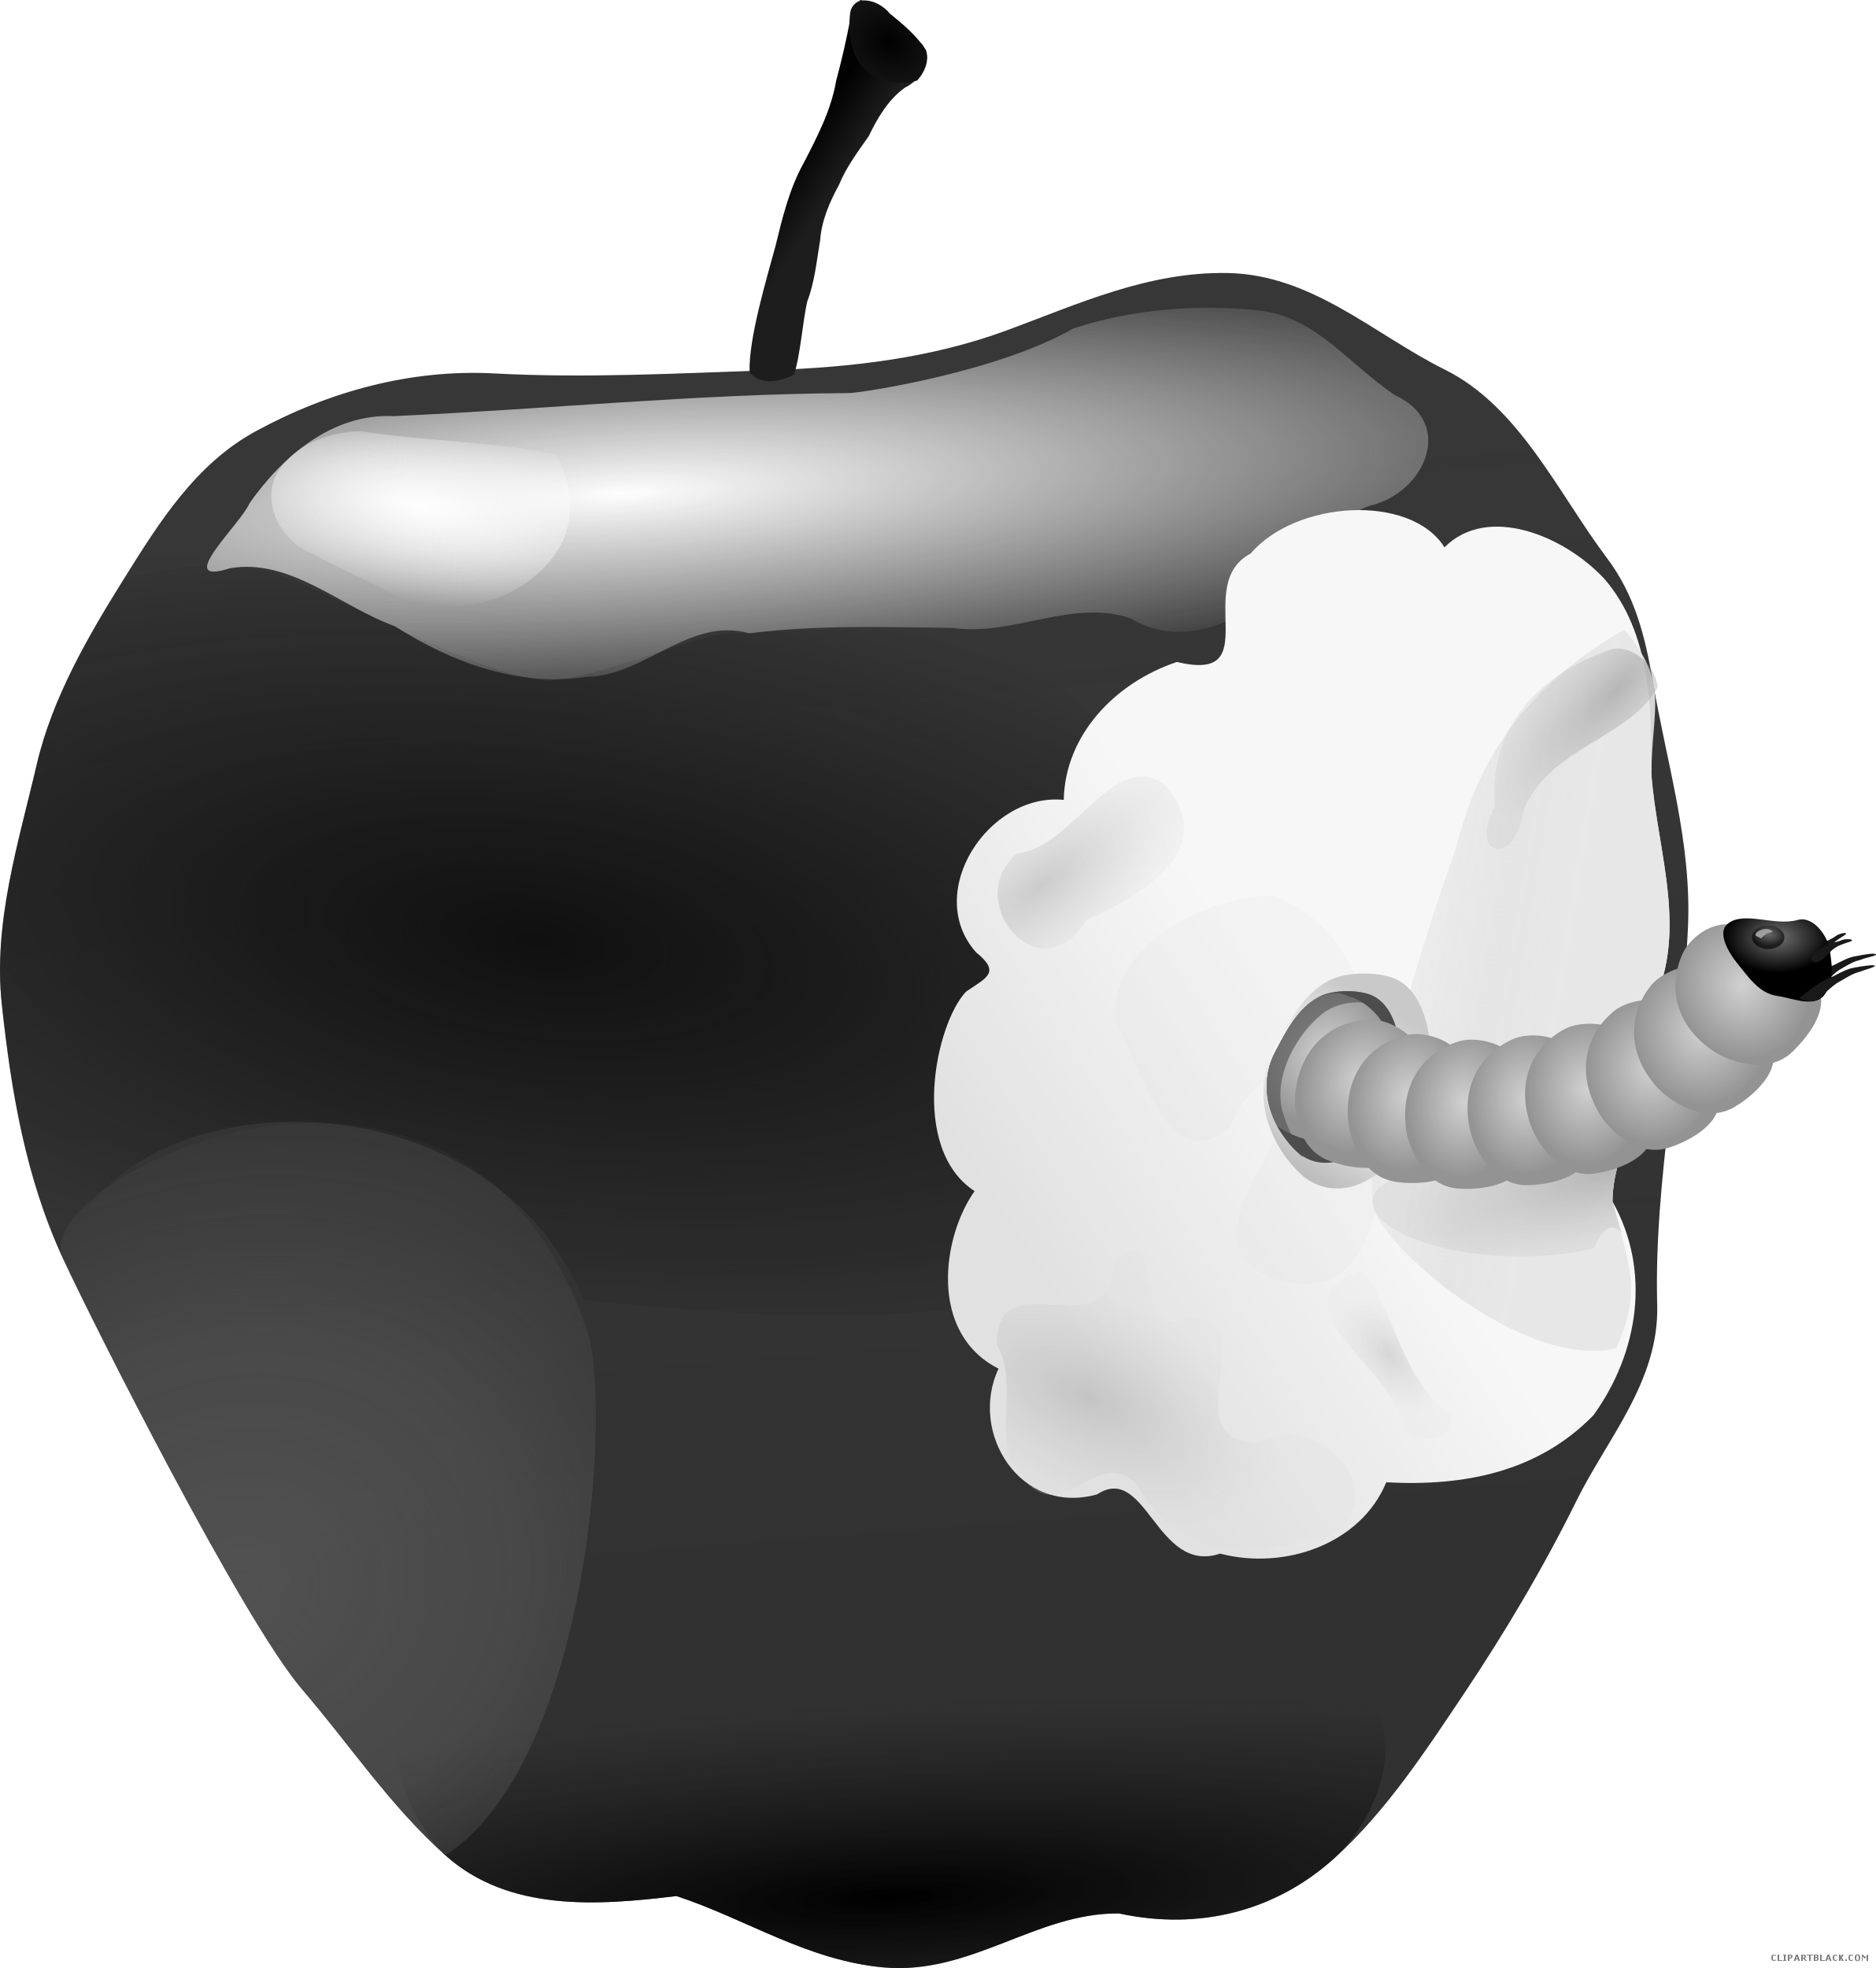 Worm clipart fishing worm. Apple with clipartblack com